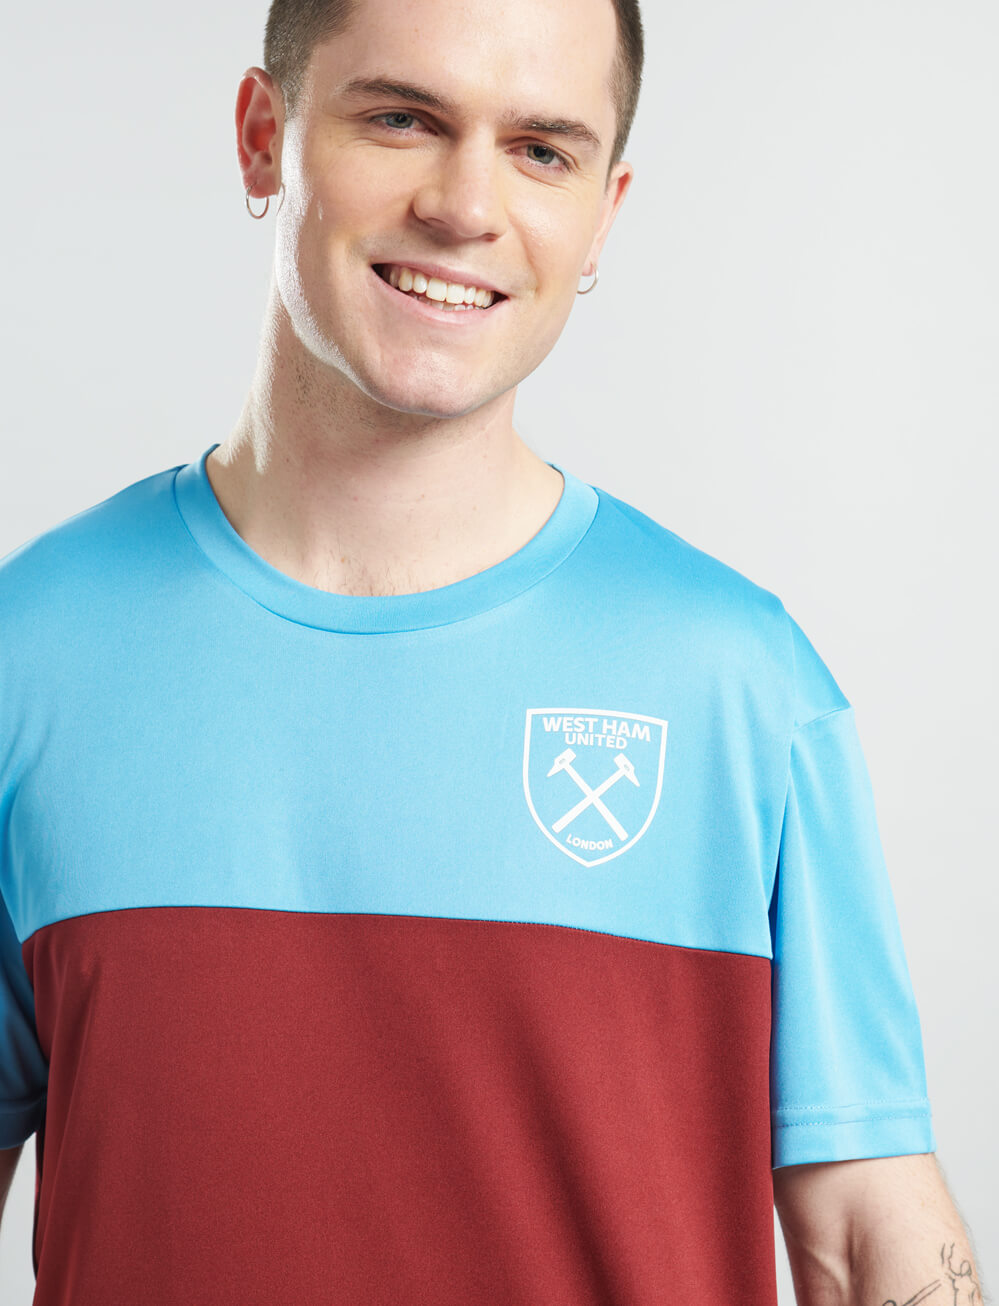 Official West Ham United T-Shirt - Blue - The World Football Store